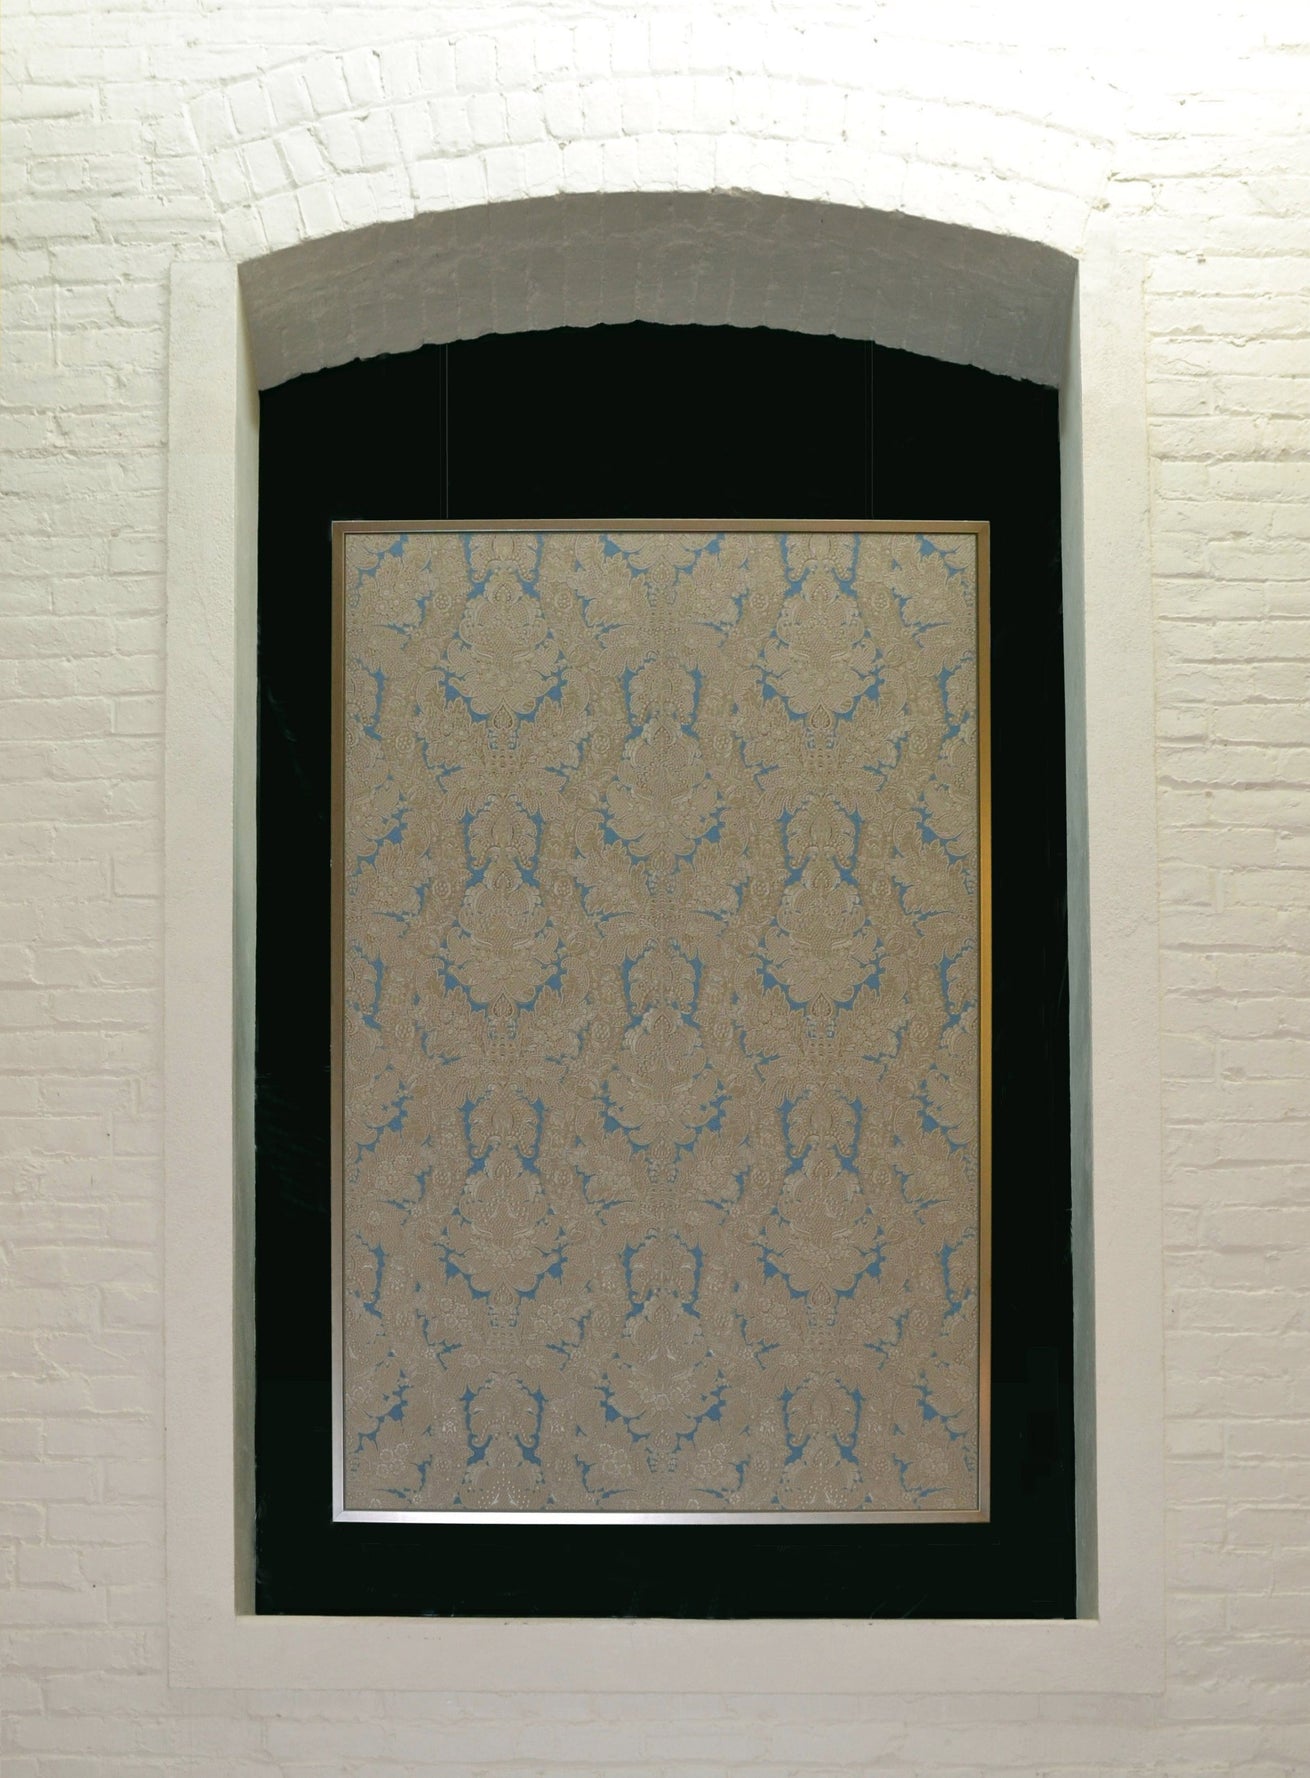 Silver & Blue Tooled “Leather” Sidewall - Framed Antique Wallpaper Art